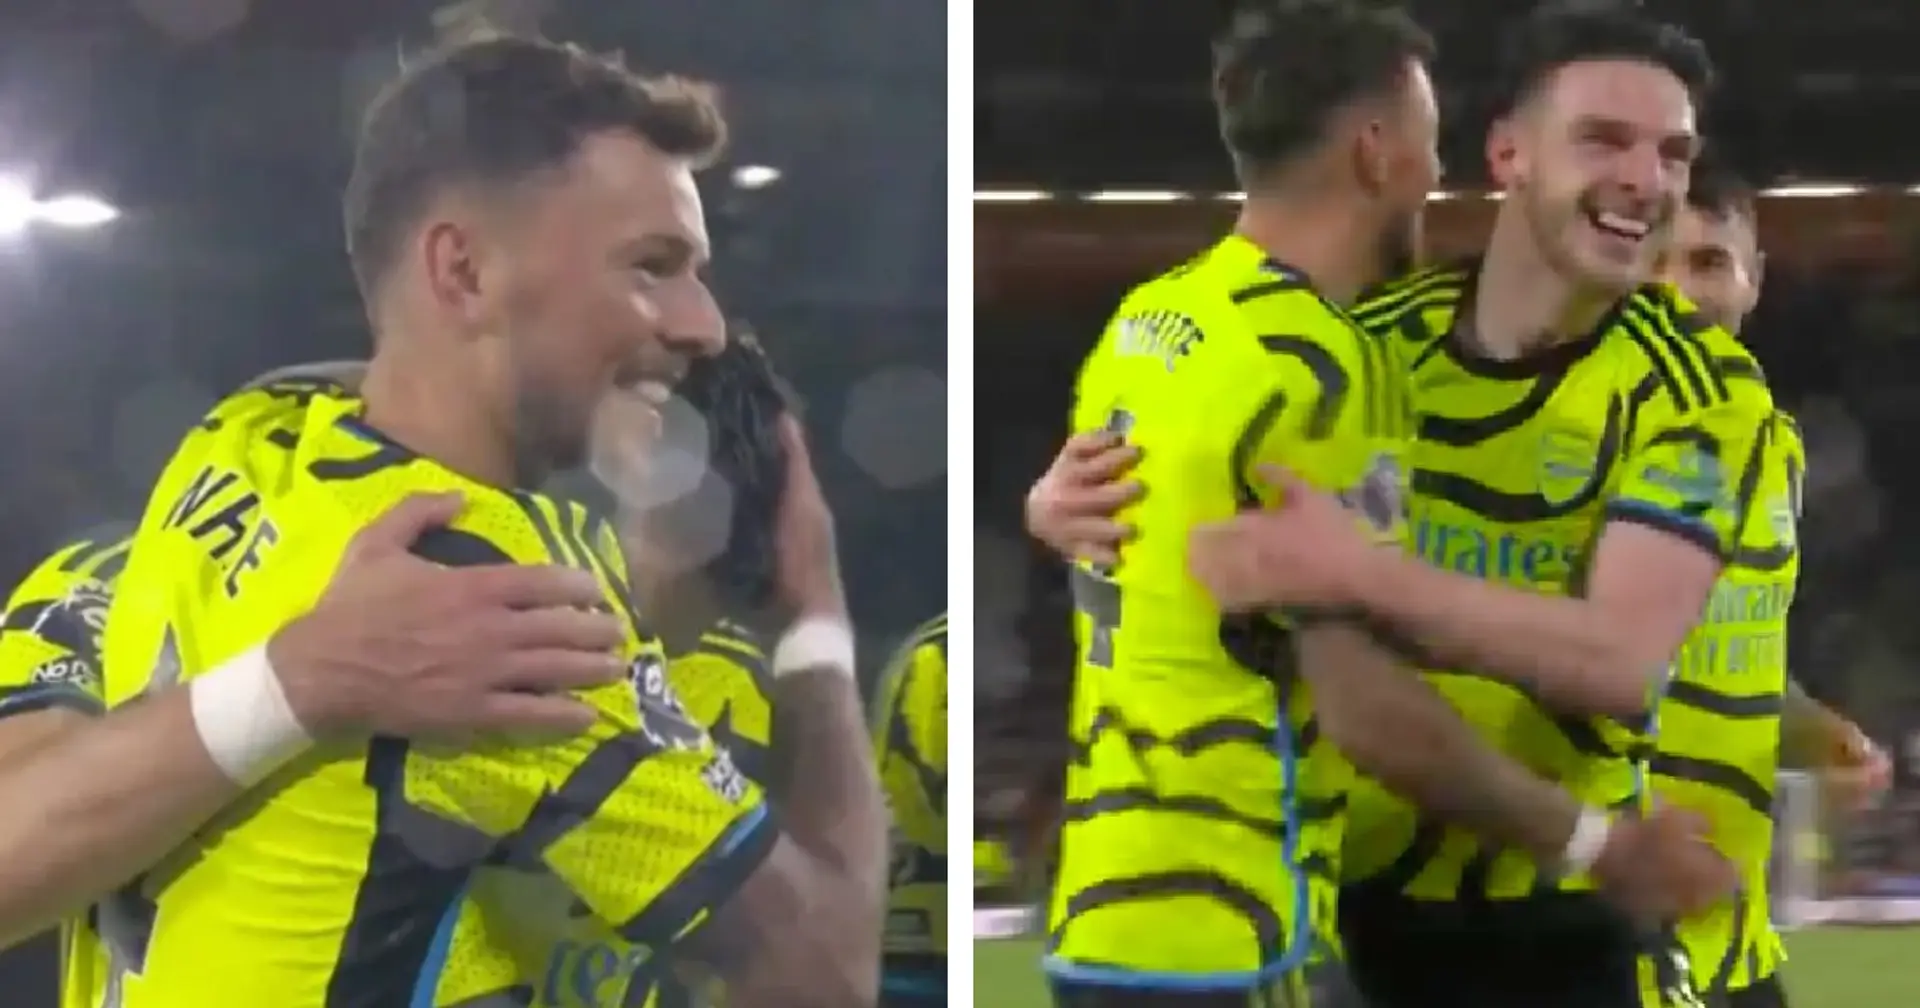 Arsenal players give Ben White 'Kiwior treatment' after rare goal - spotted